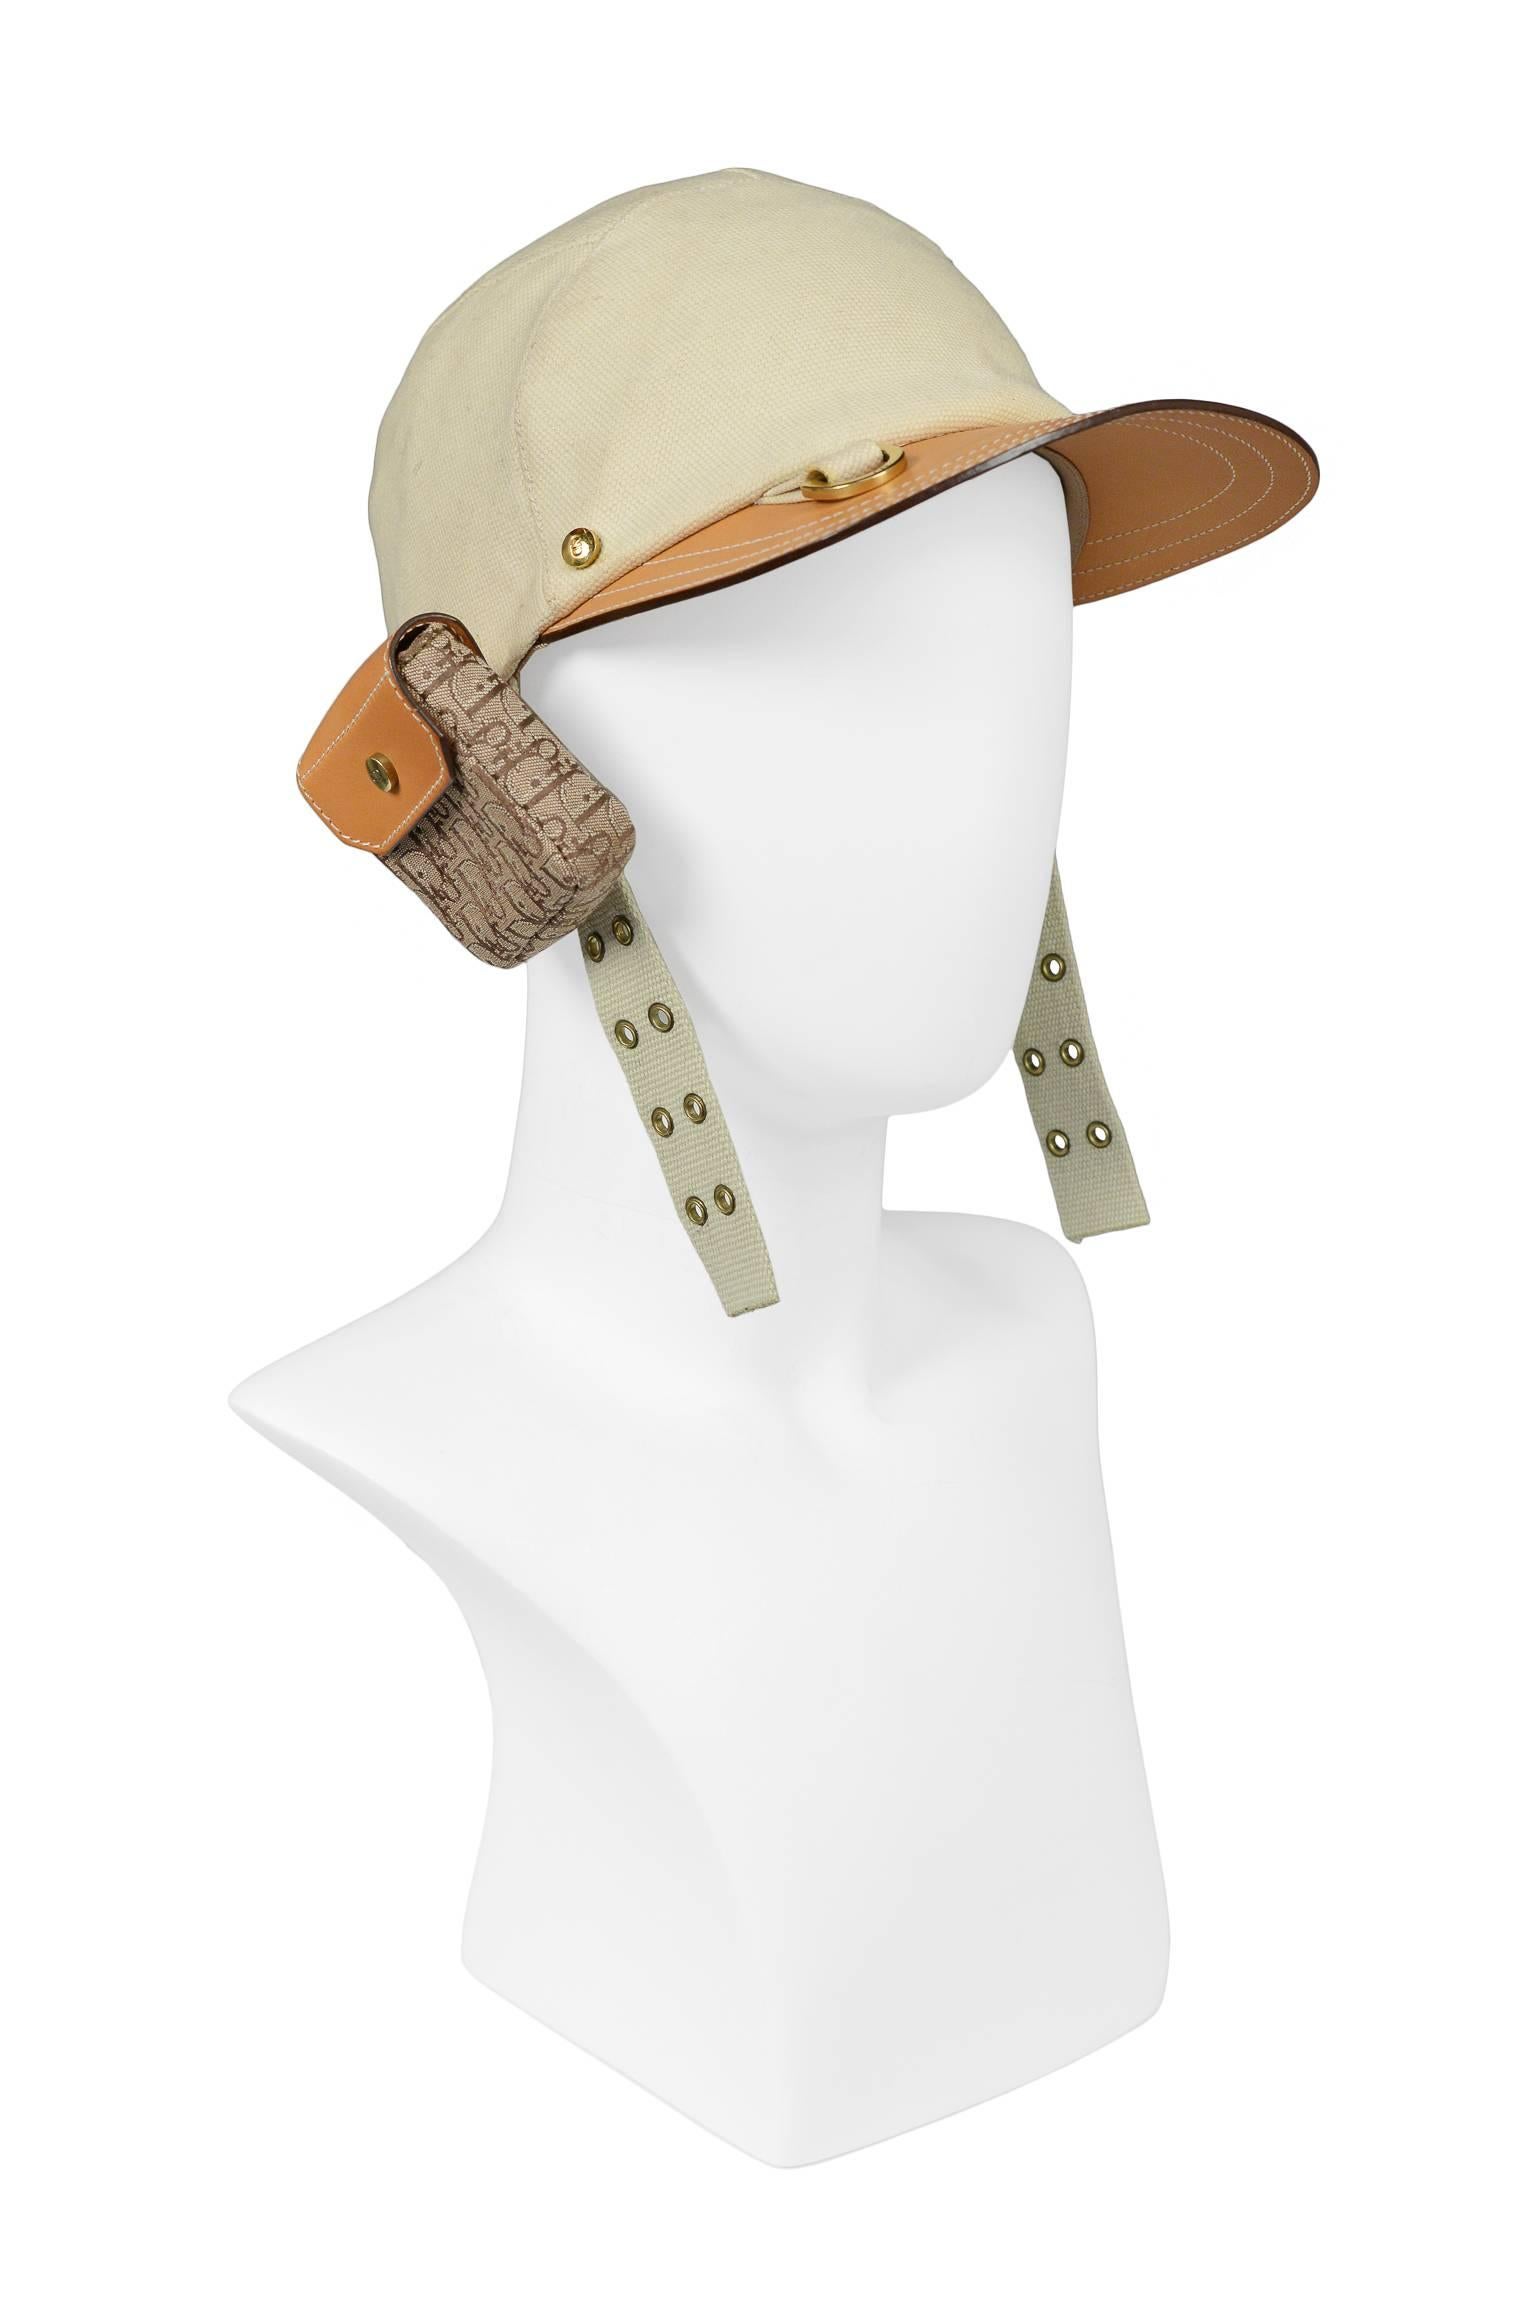 Street chic Christian Dior by John Galliano khaki canvas and tan leather cargo hat with logo pocket, gold tone hardware, and grommet utility straps. Has elastic at back for easy fit.  Hat has never been worn. Collection SS 2002.